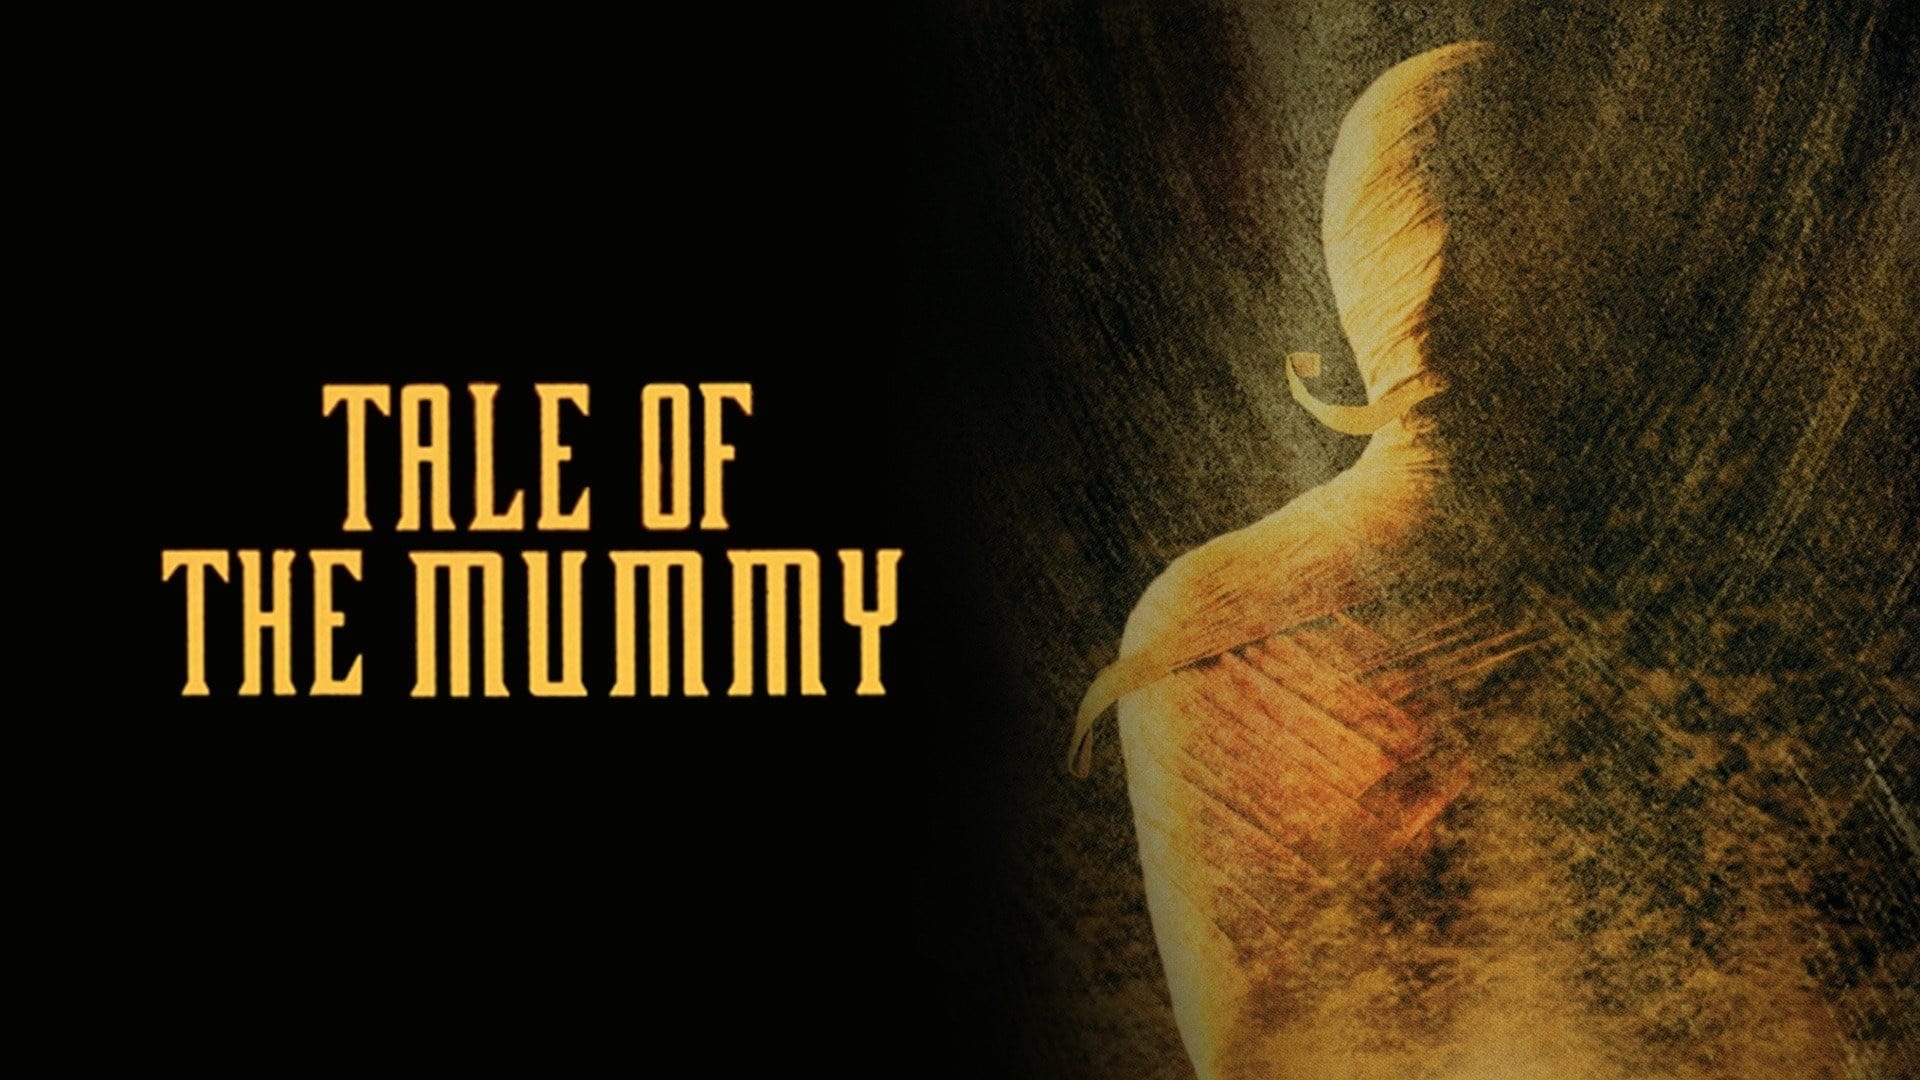 Tale of the Mummy